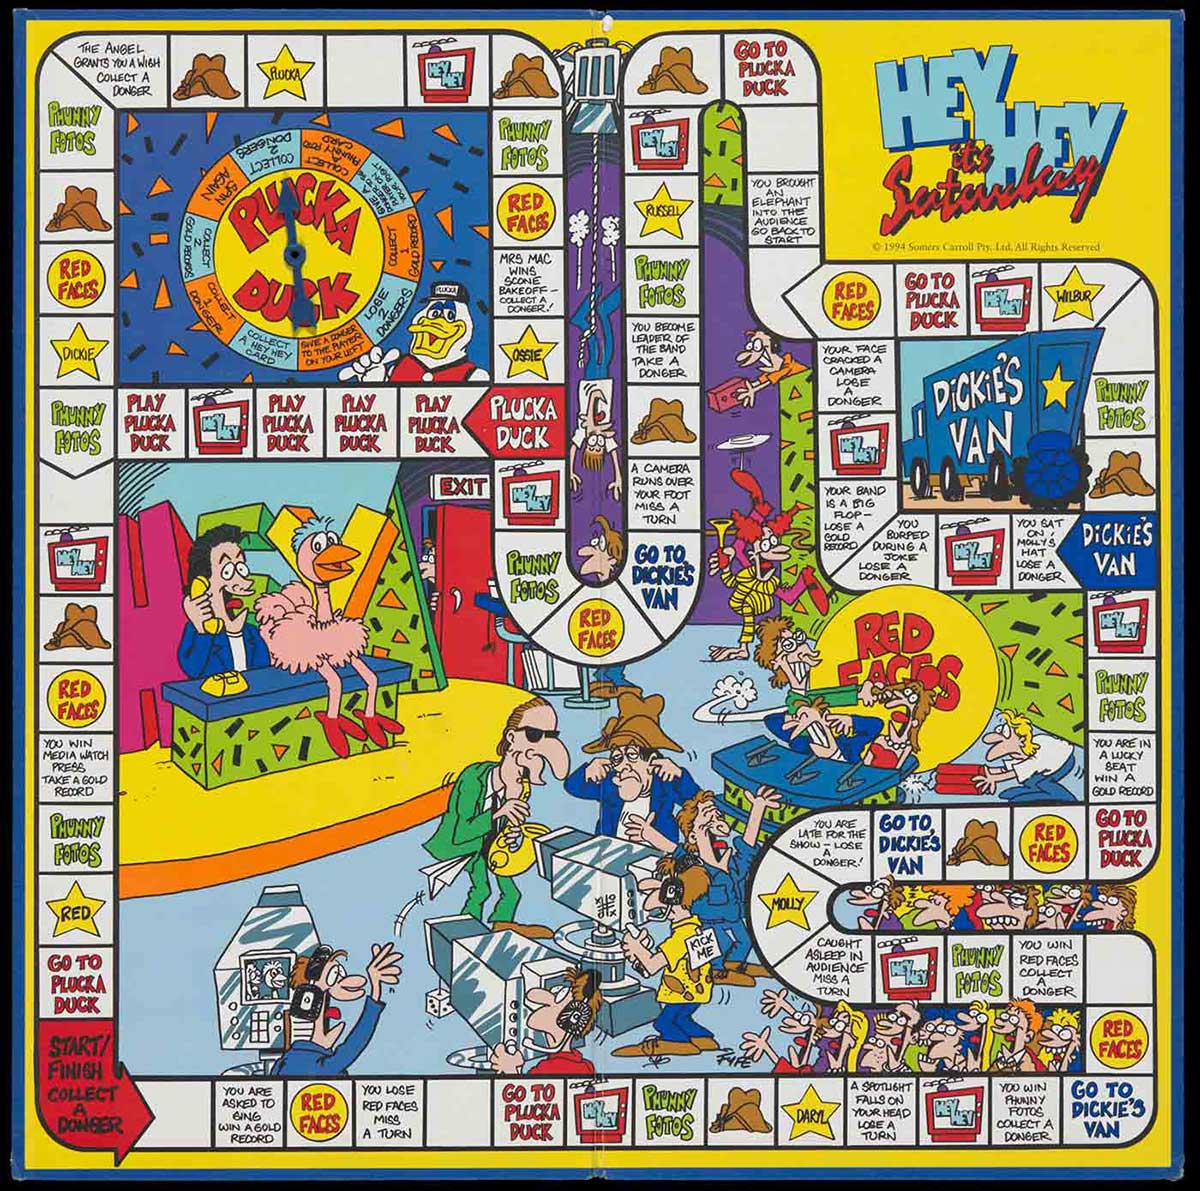 A game board with blue paper exterior and game surface interior, inscribed 'HEY HEY it's Saturday'. The interior shows white game spaces, text and illustrations in colour. A blue plastic arrow is affixed to the board in the upper left quadrant. - click to view larger image